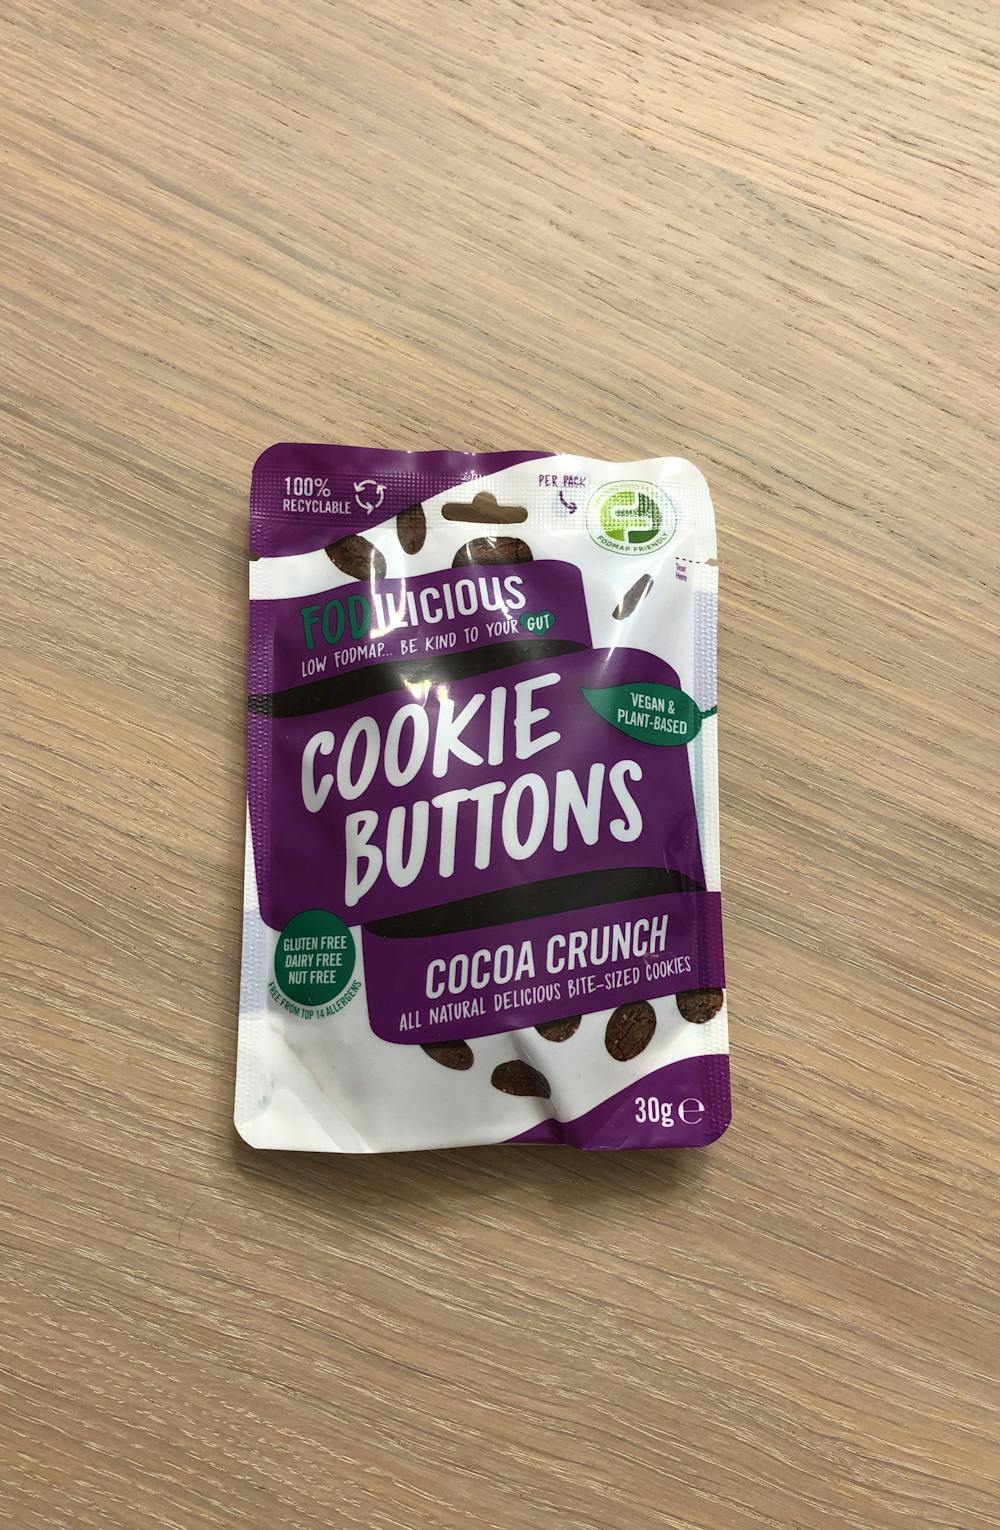 Cookie buttons, cocoa crunch, Fodlicious